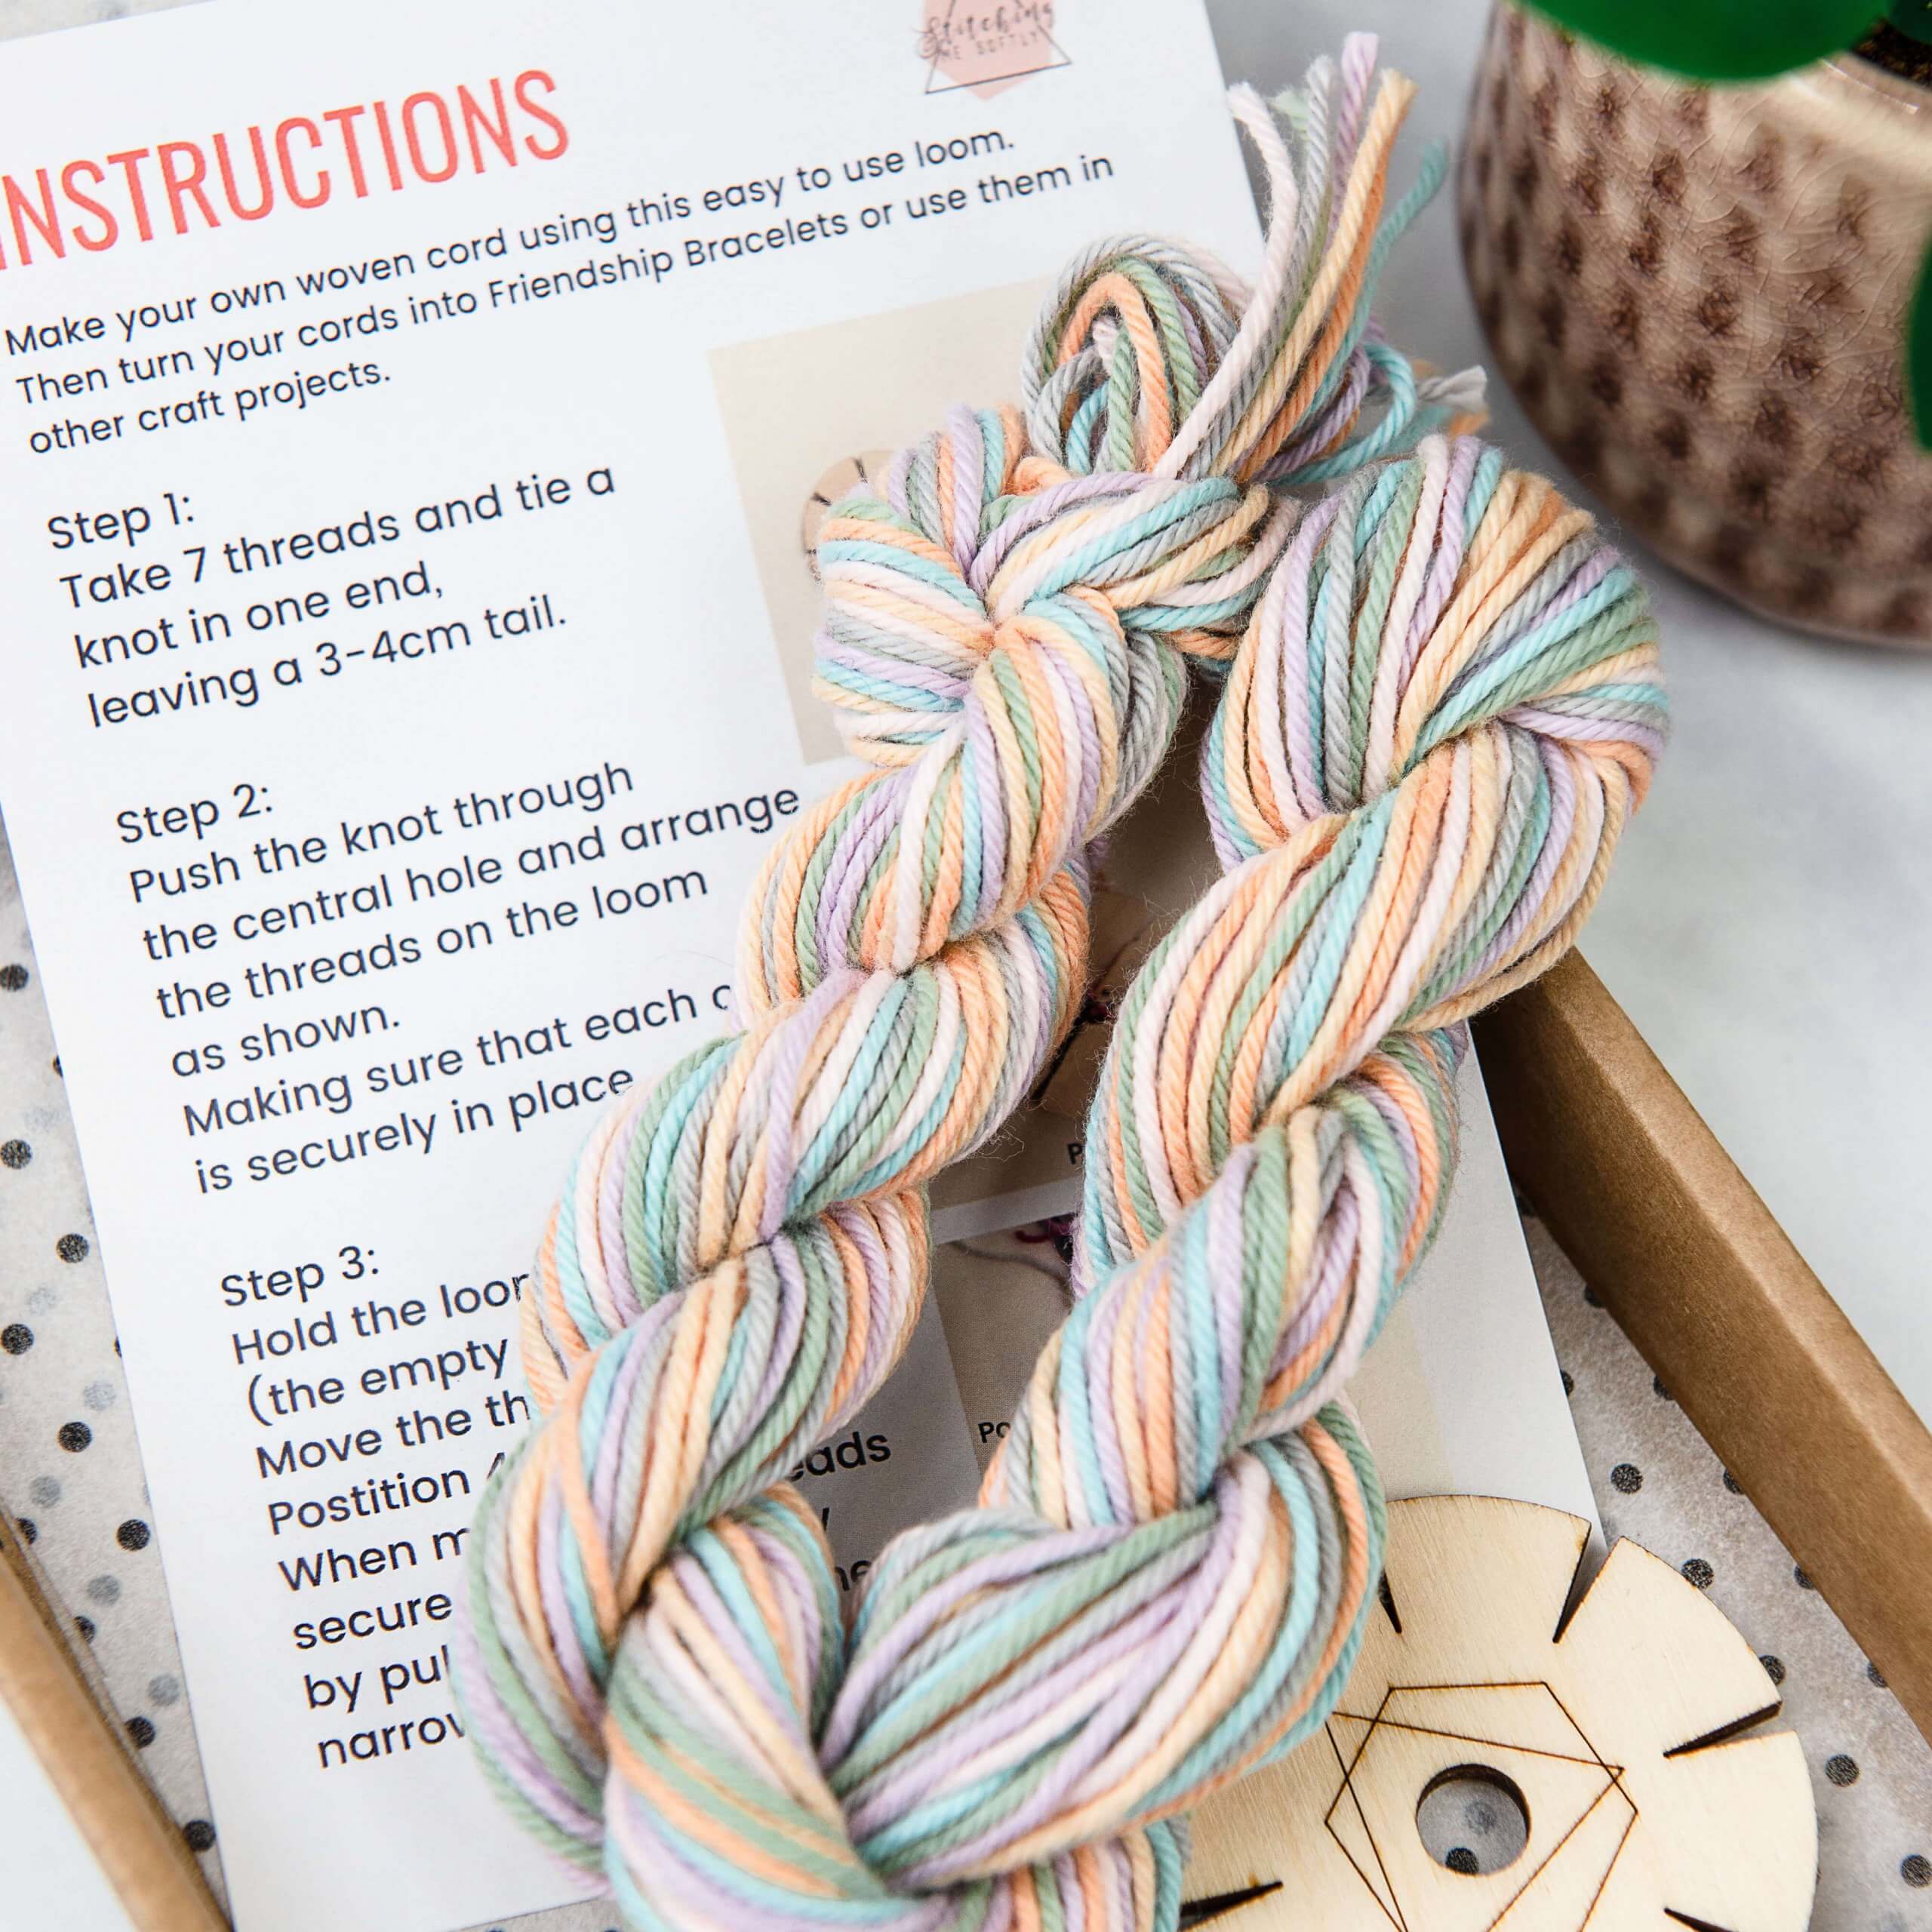 Special Edition Friendship Bracelet Kit • Craft and crochet kits, gifts and  accessories by Stitching Me Softly